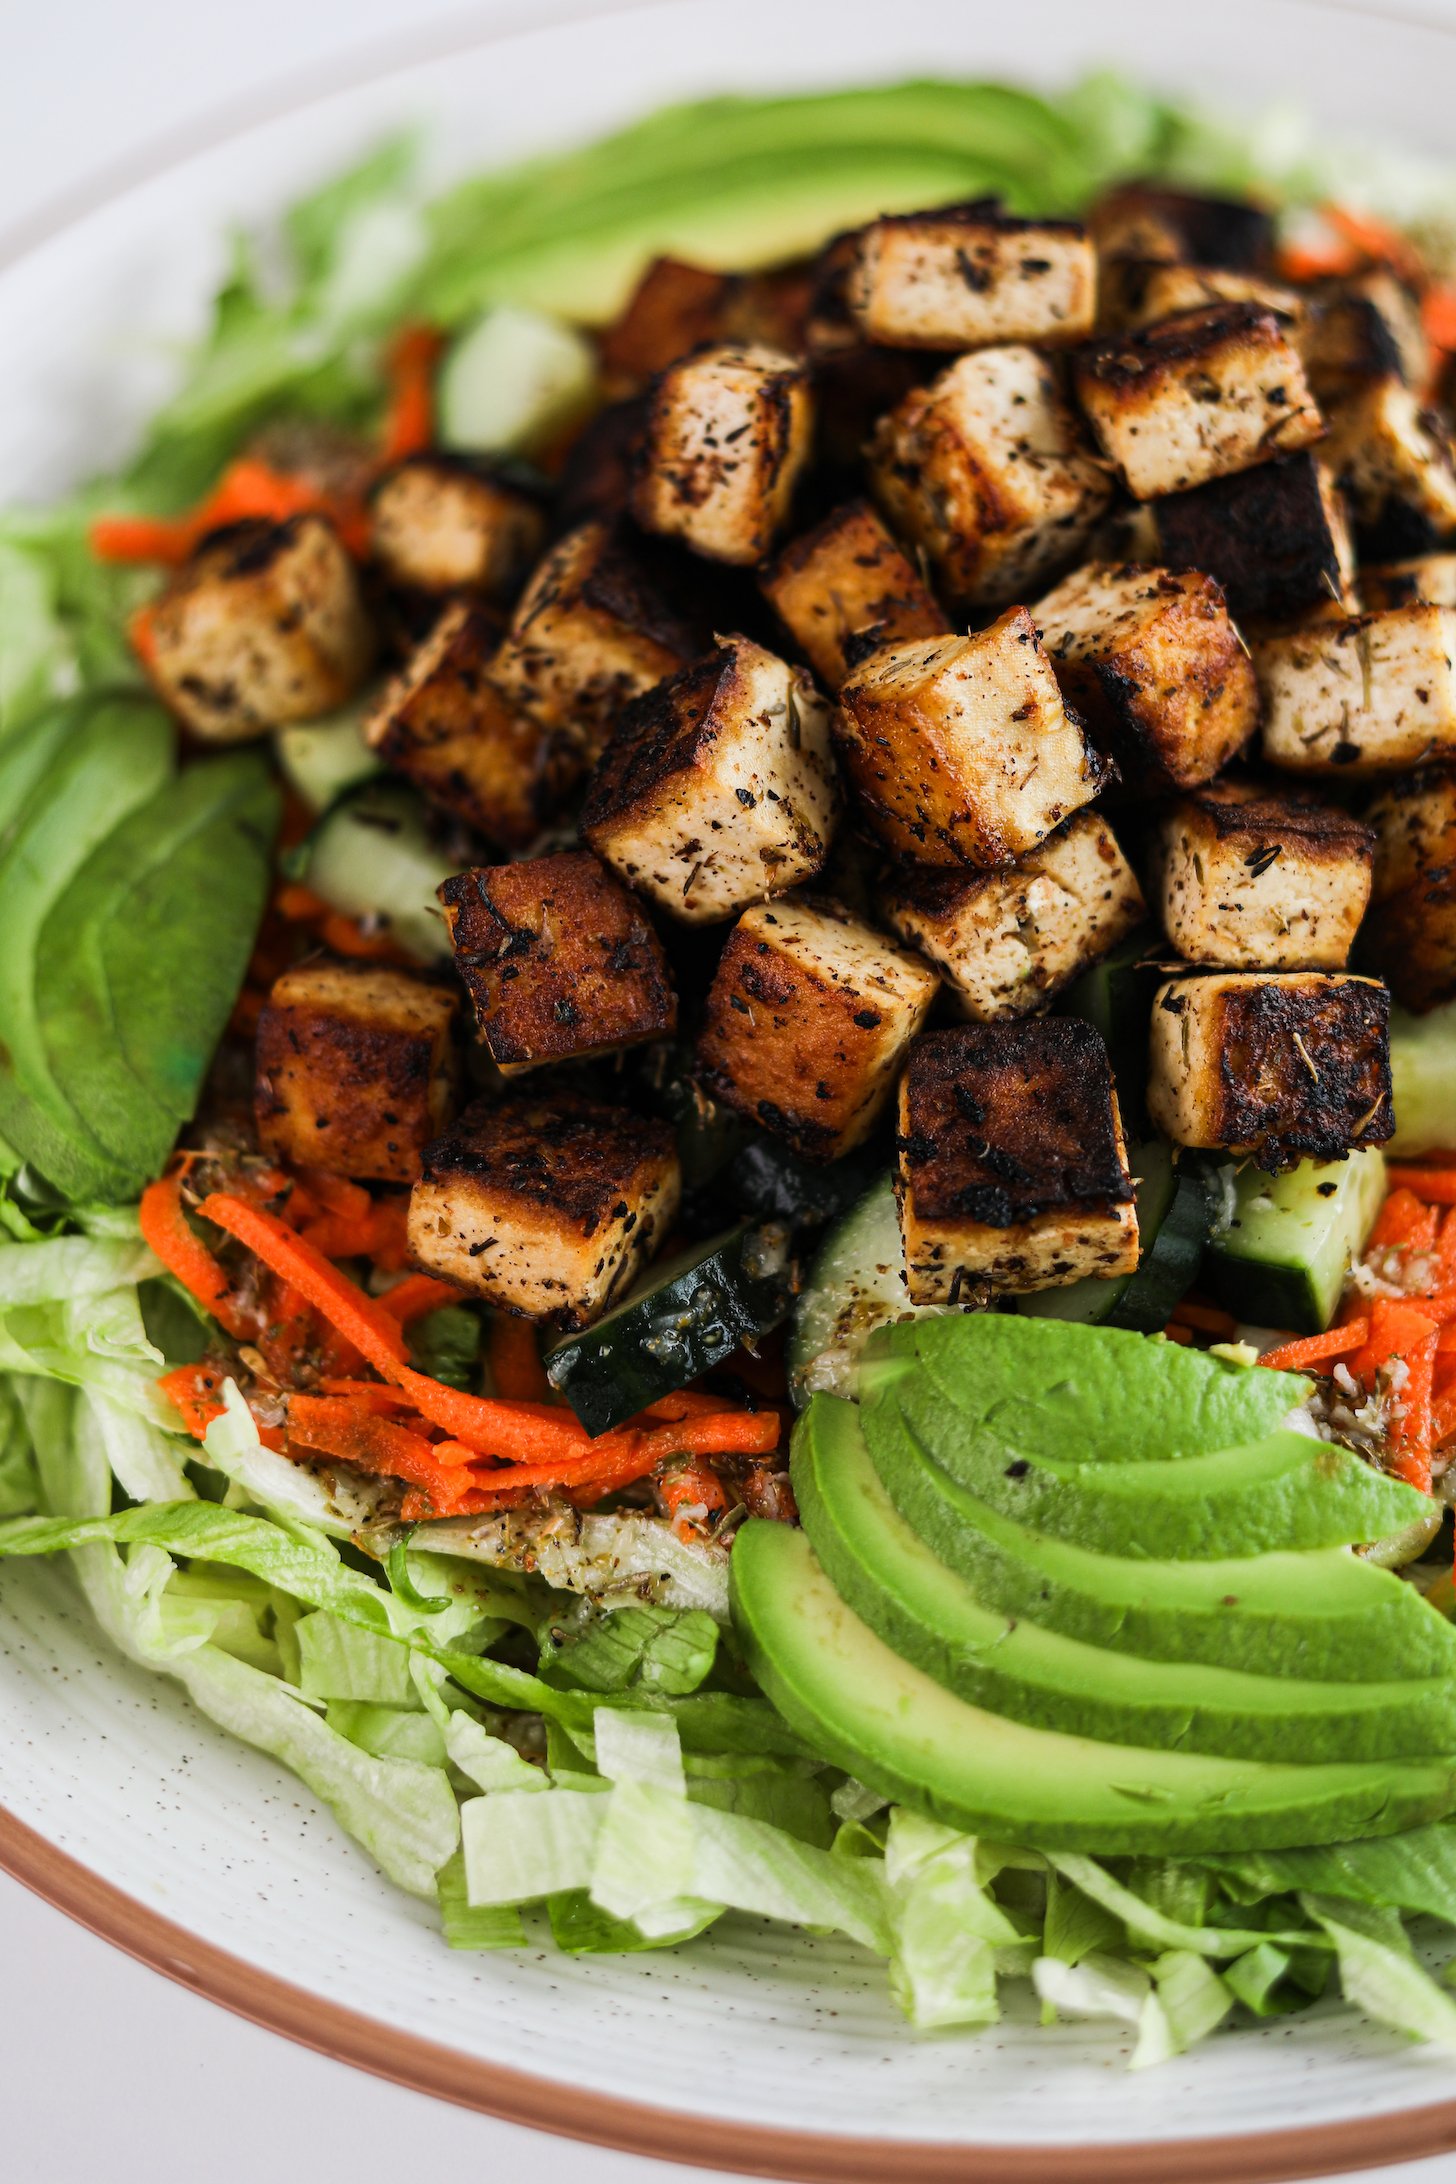 Perspective view of a vibrant salad adorned with charred tofu cubes.